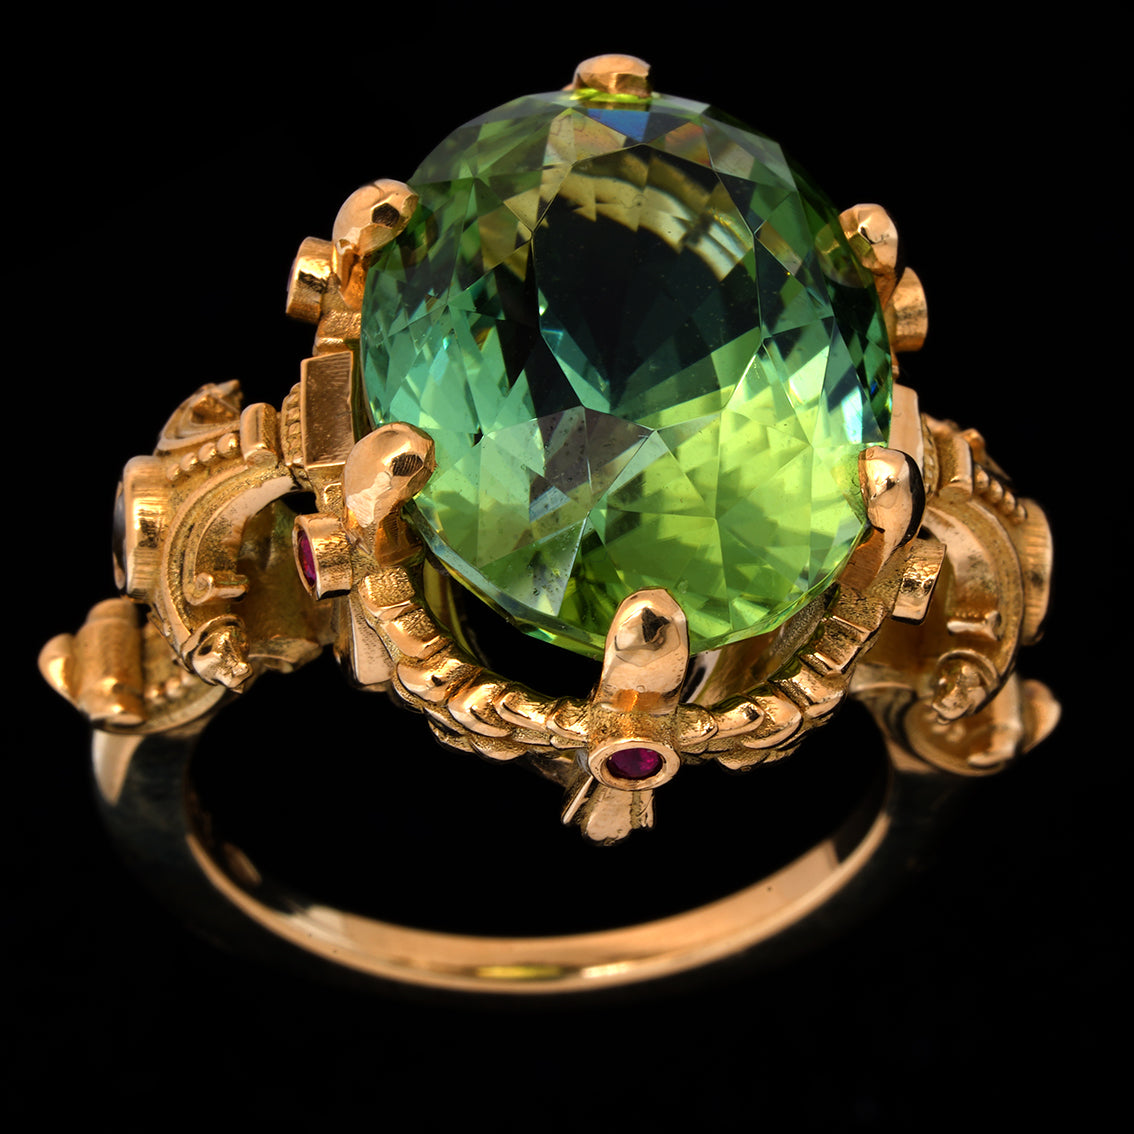 MANTLE OF CHRONOS RING